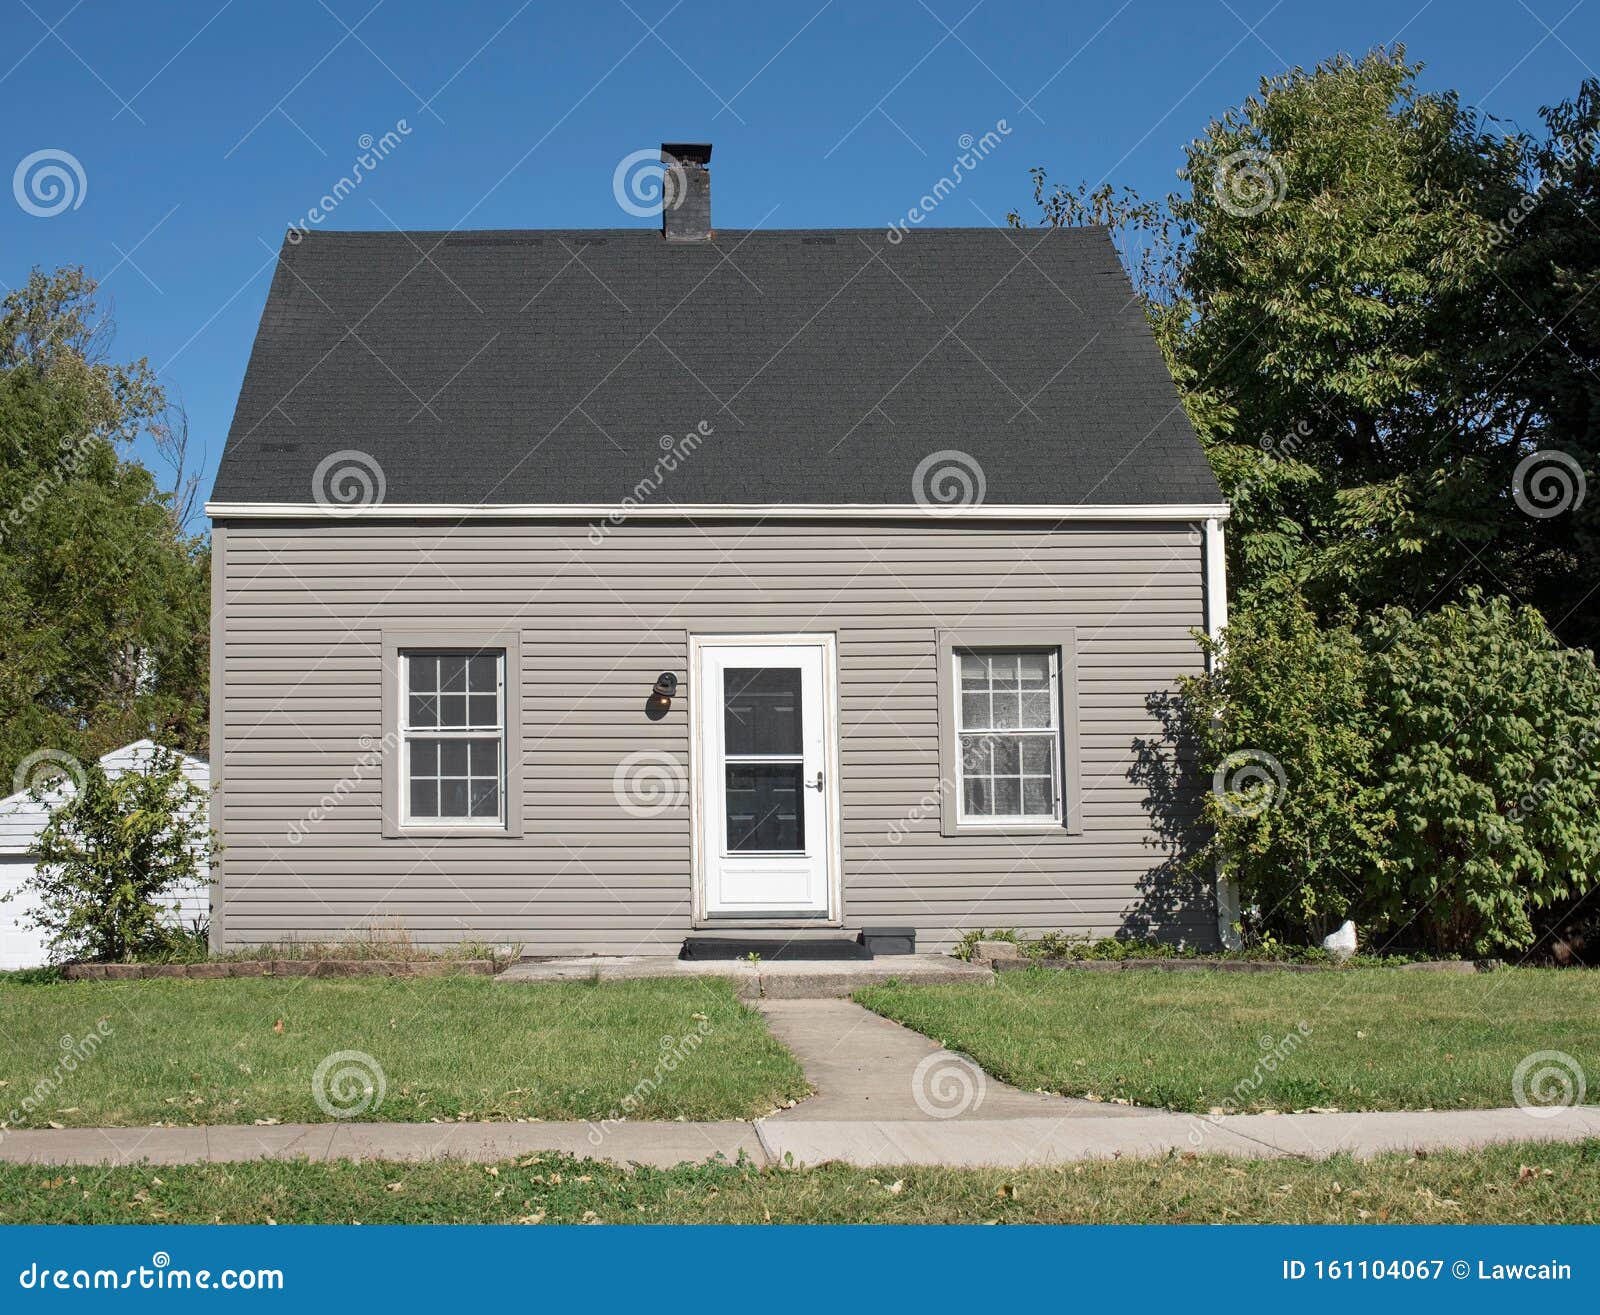 tiny gray low income house